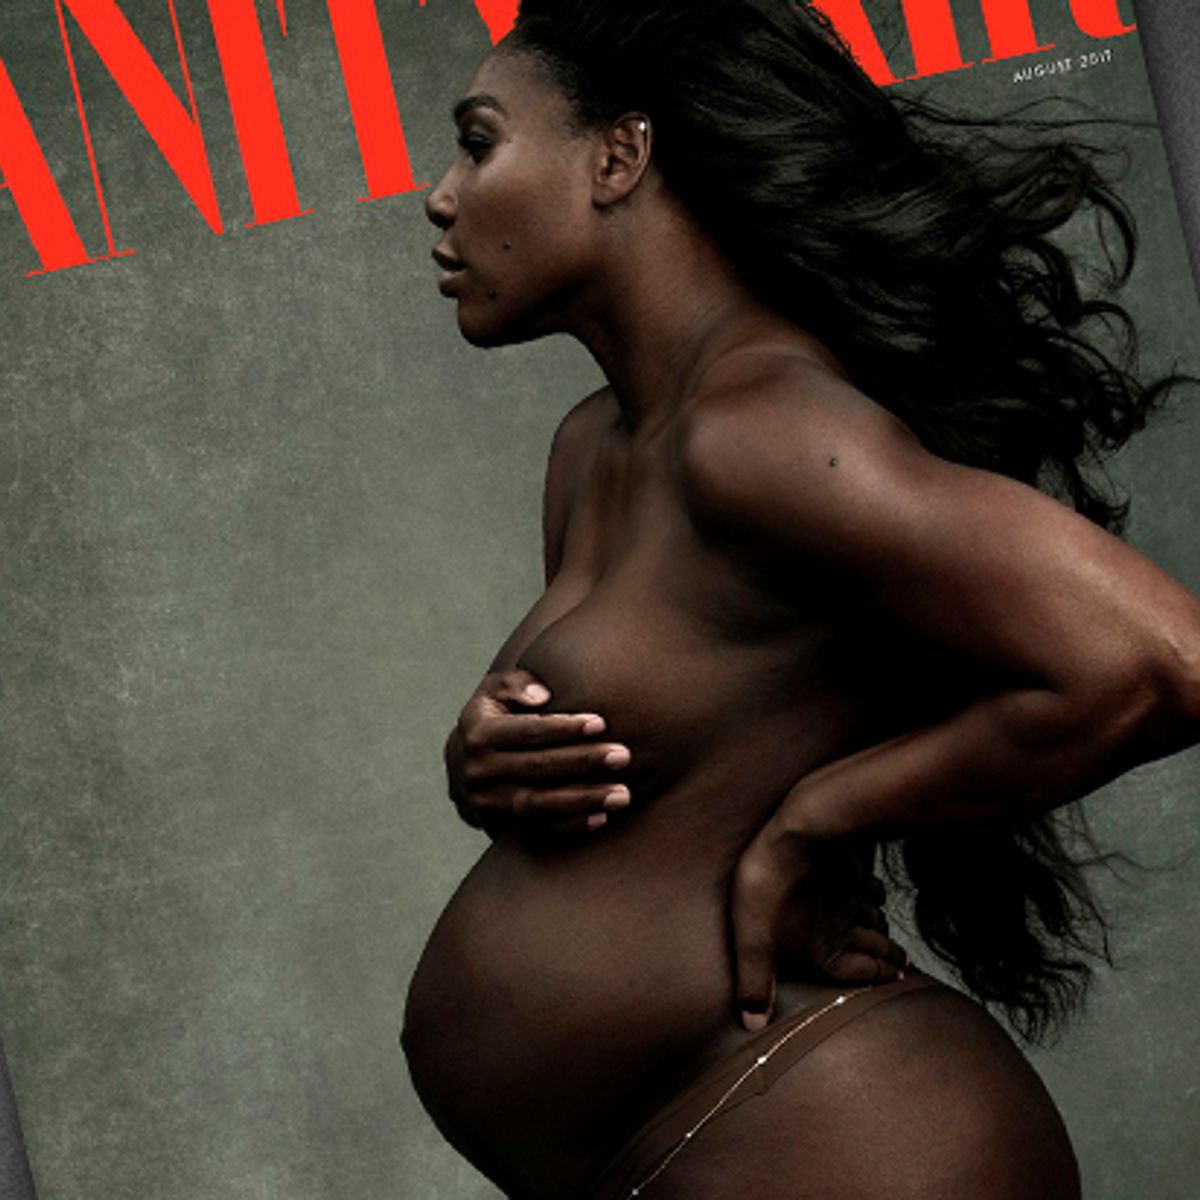 Serena Williams Poses Nearly Nude In Unretouched Photos For Harper's Bazaar